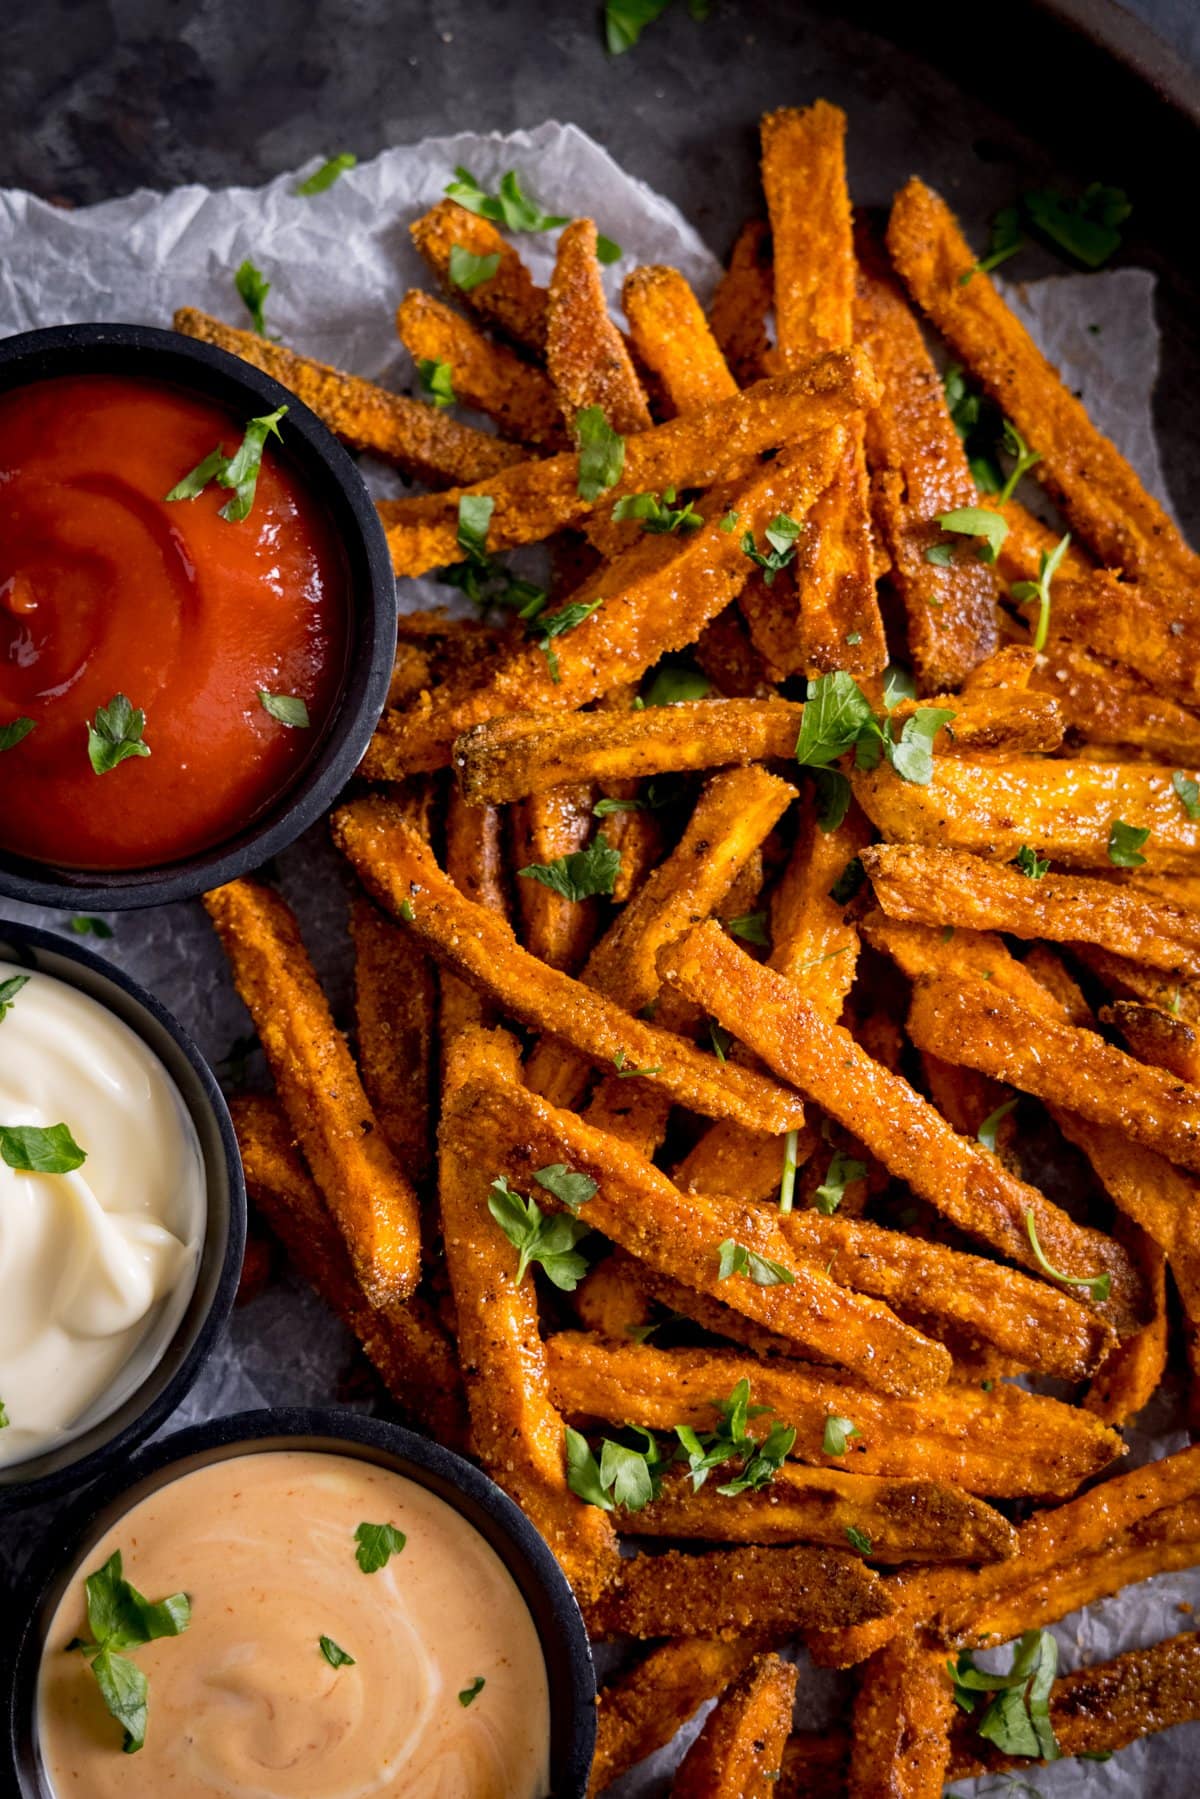 Cooked sweet potato fries sprinkled with chopped parsley with ketchup and mayo on the side in small bowls